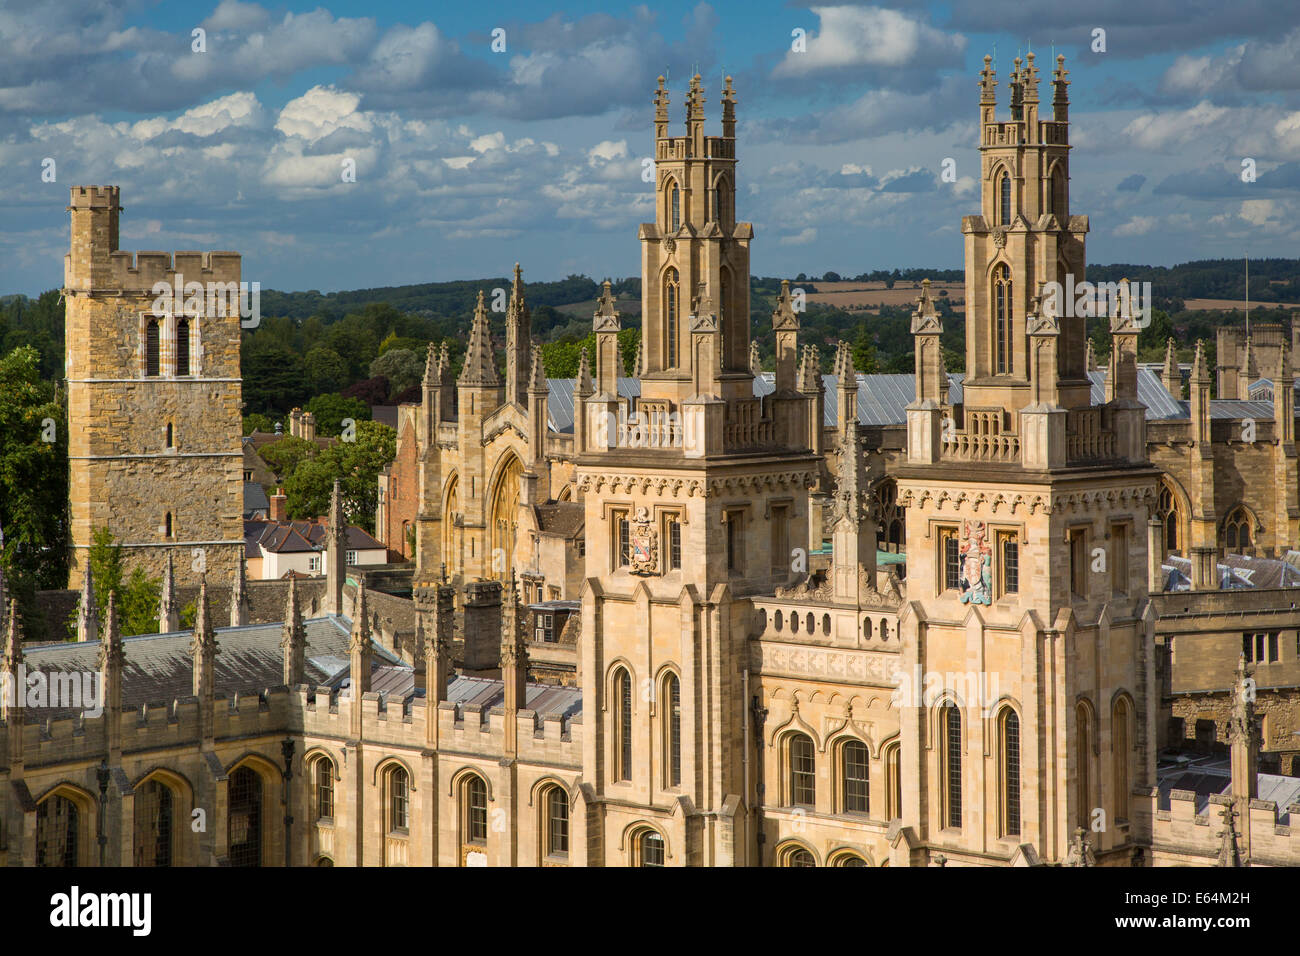 All Souls College and the many spires of Oxford University, Oxfordshire, England Stock Photo